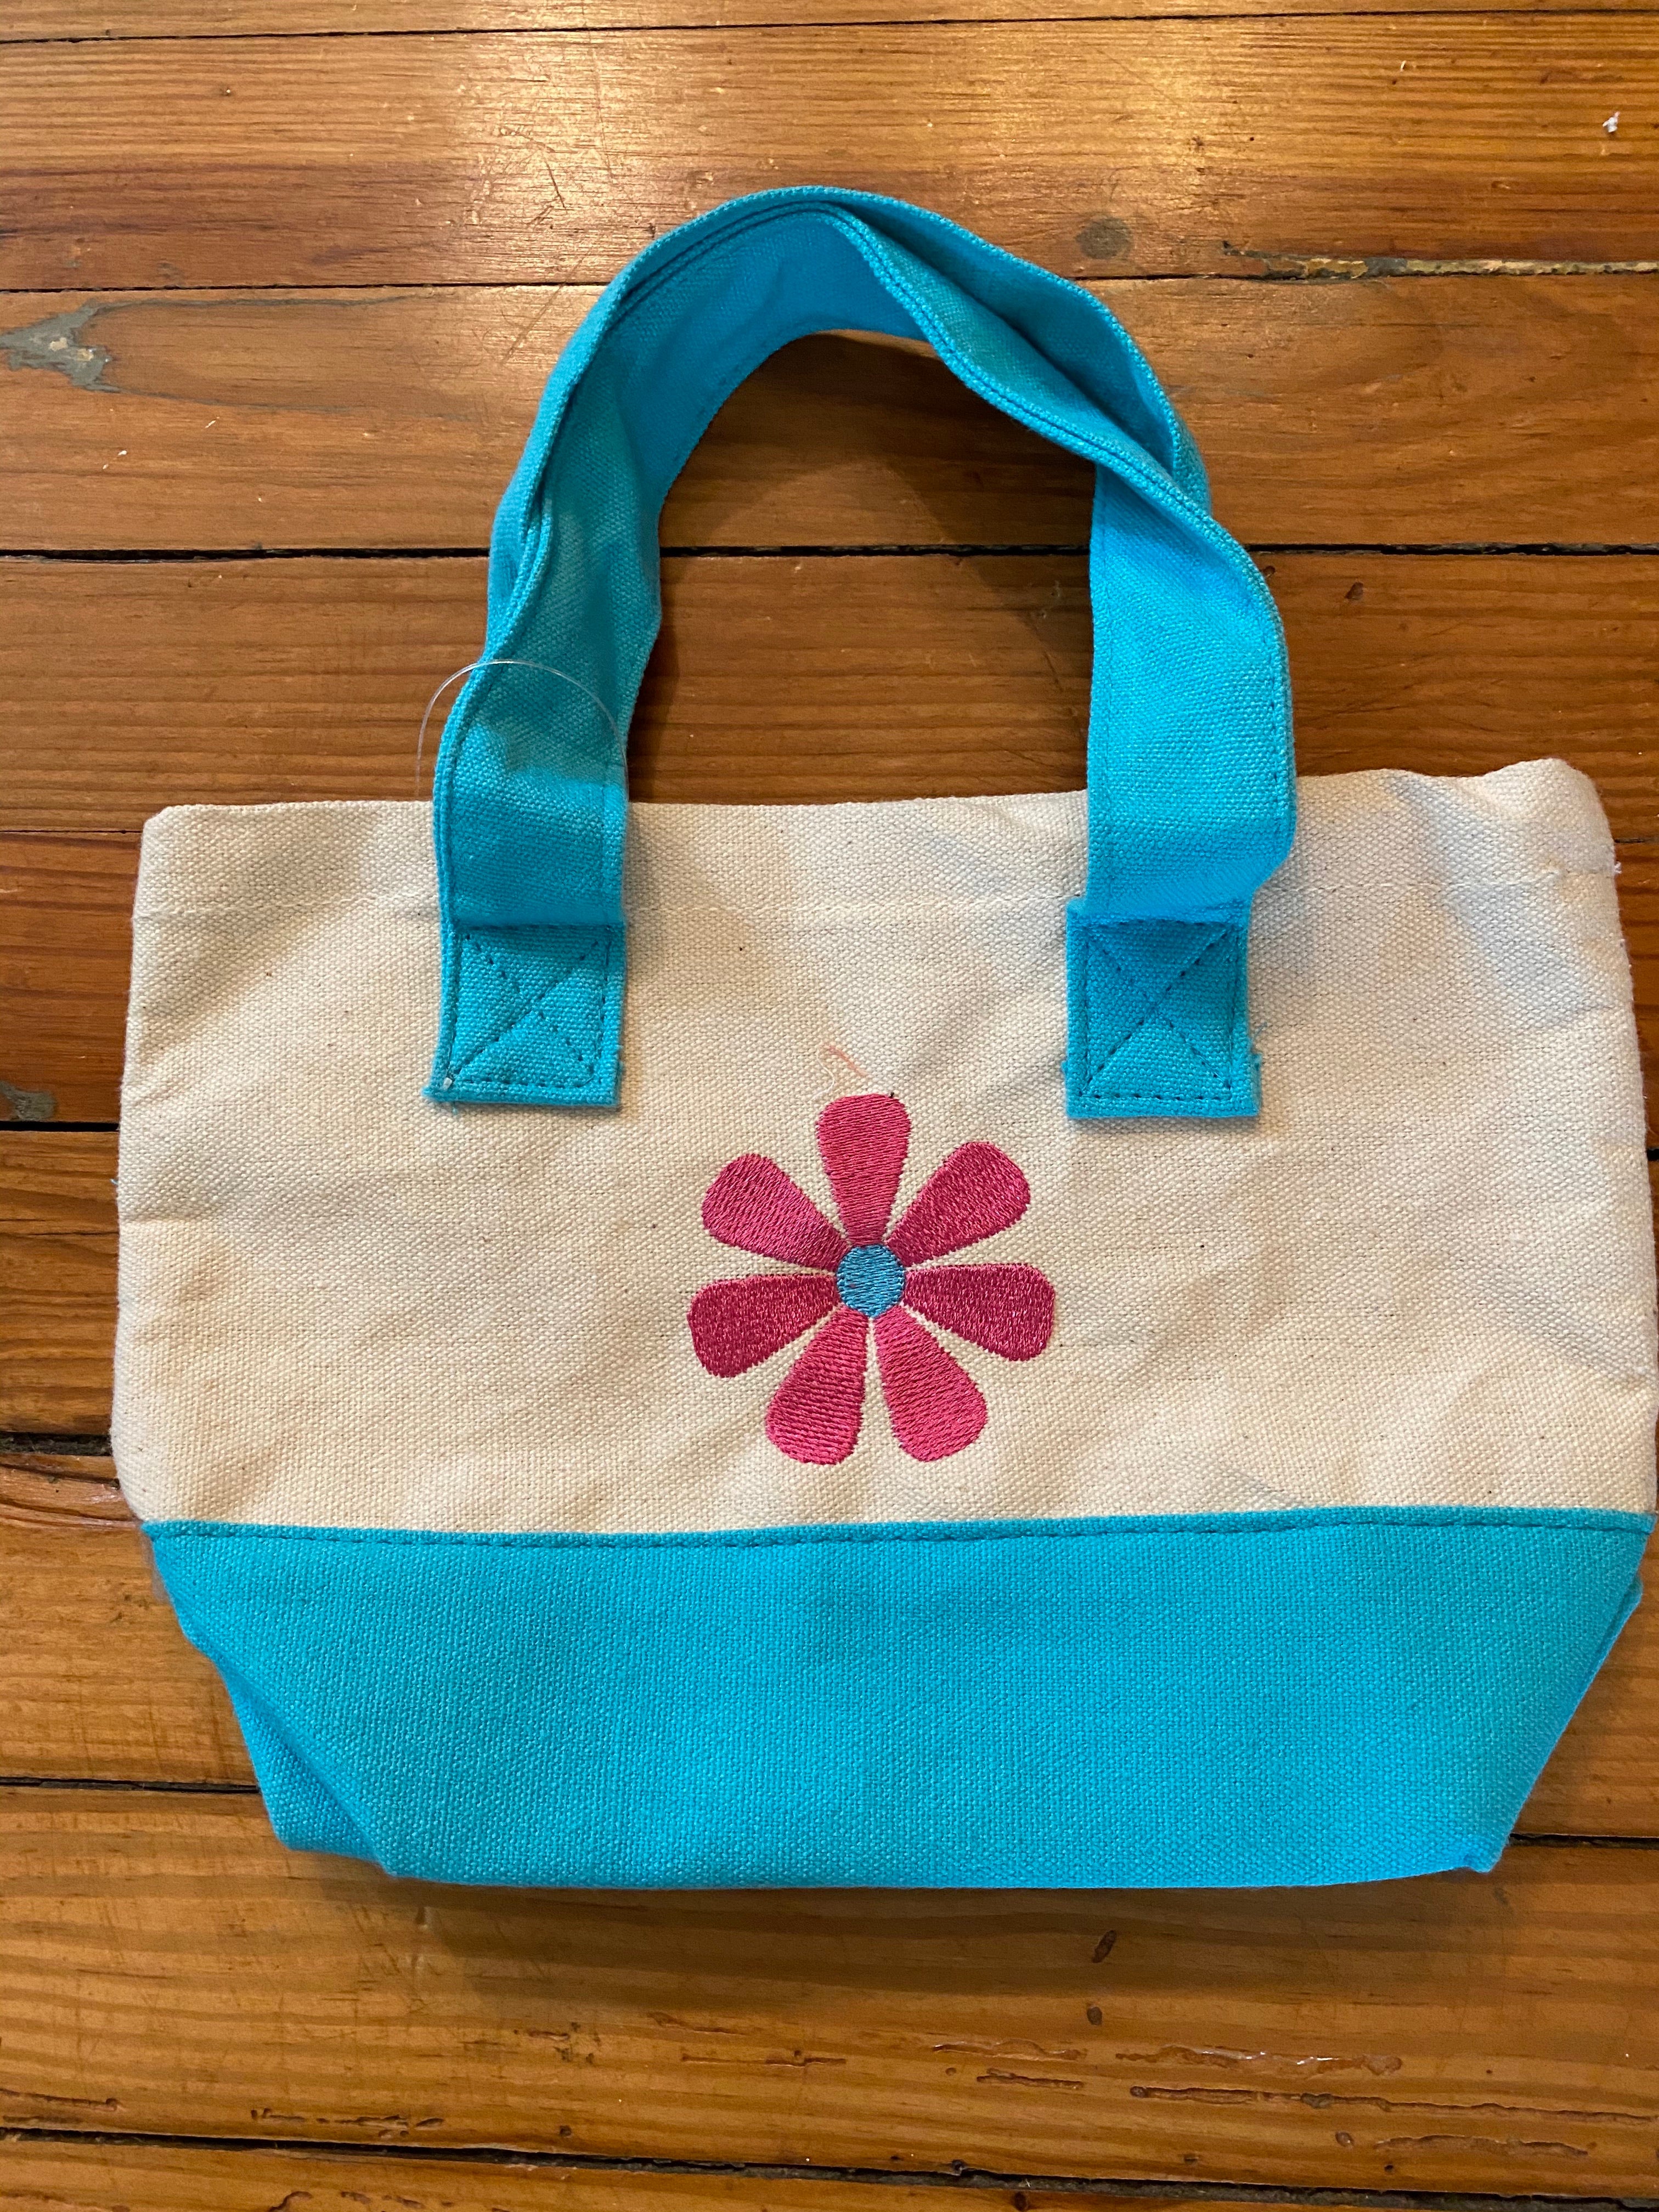 Child's Tote with Flower Design